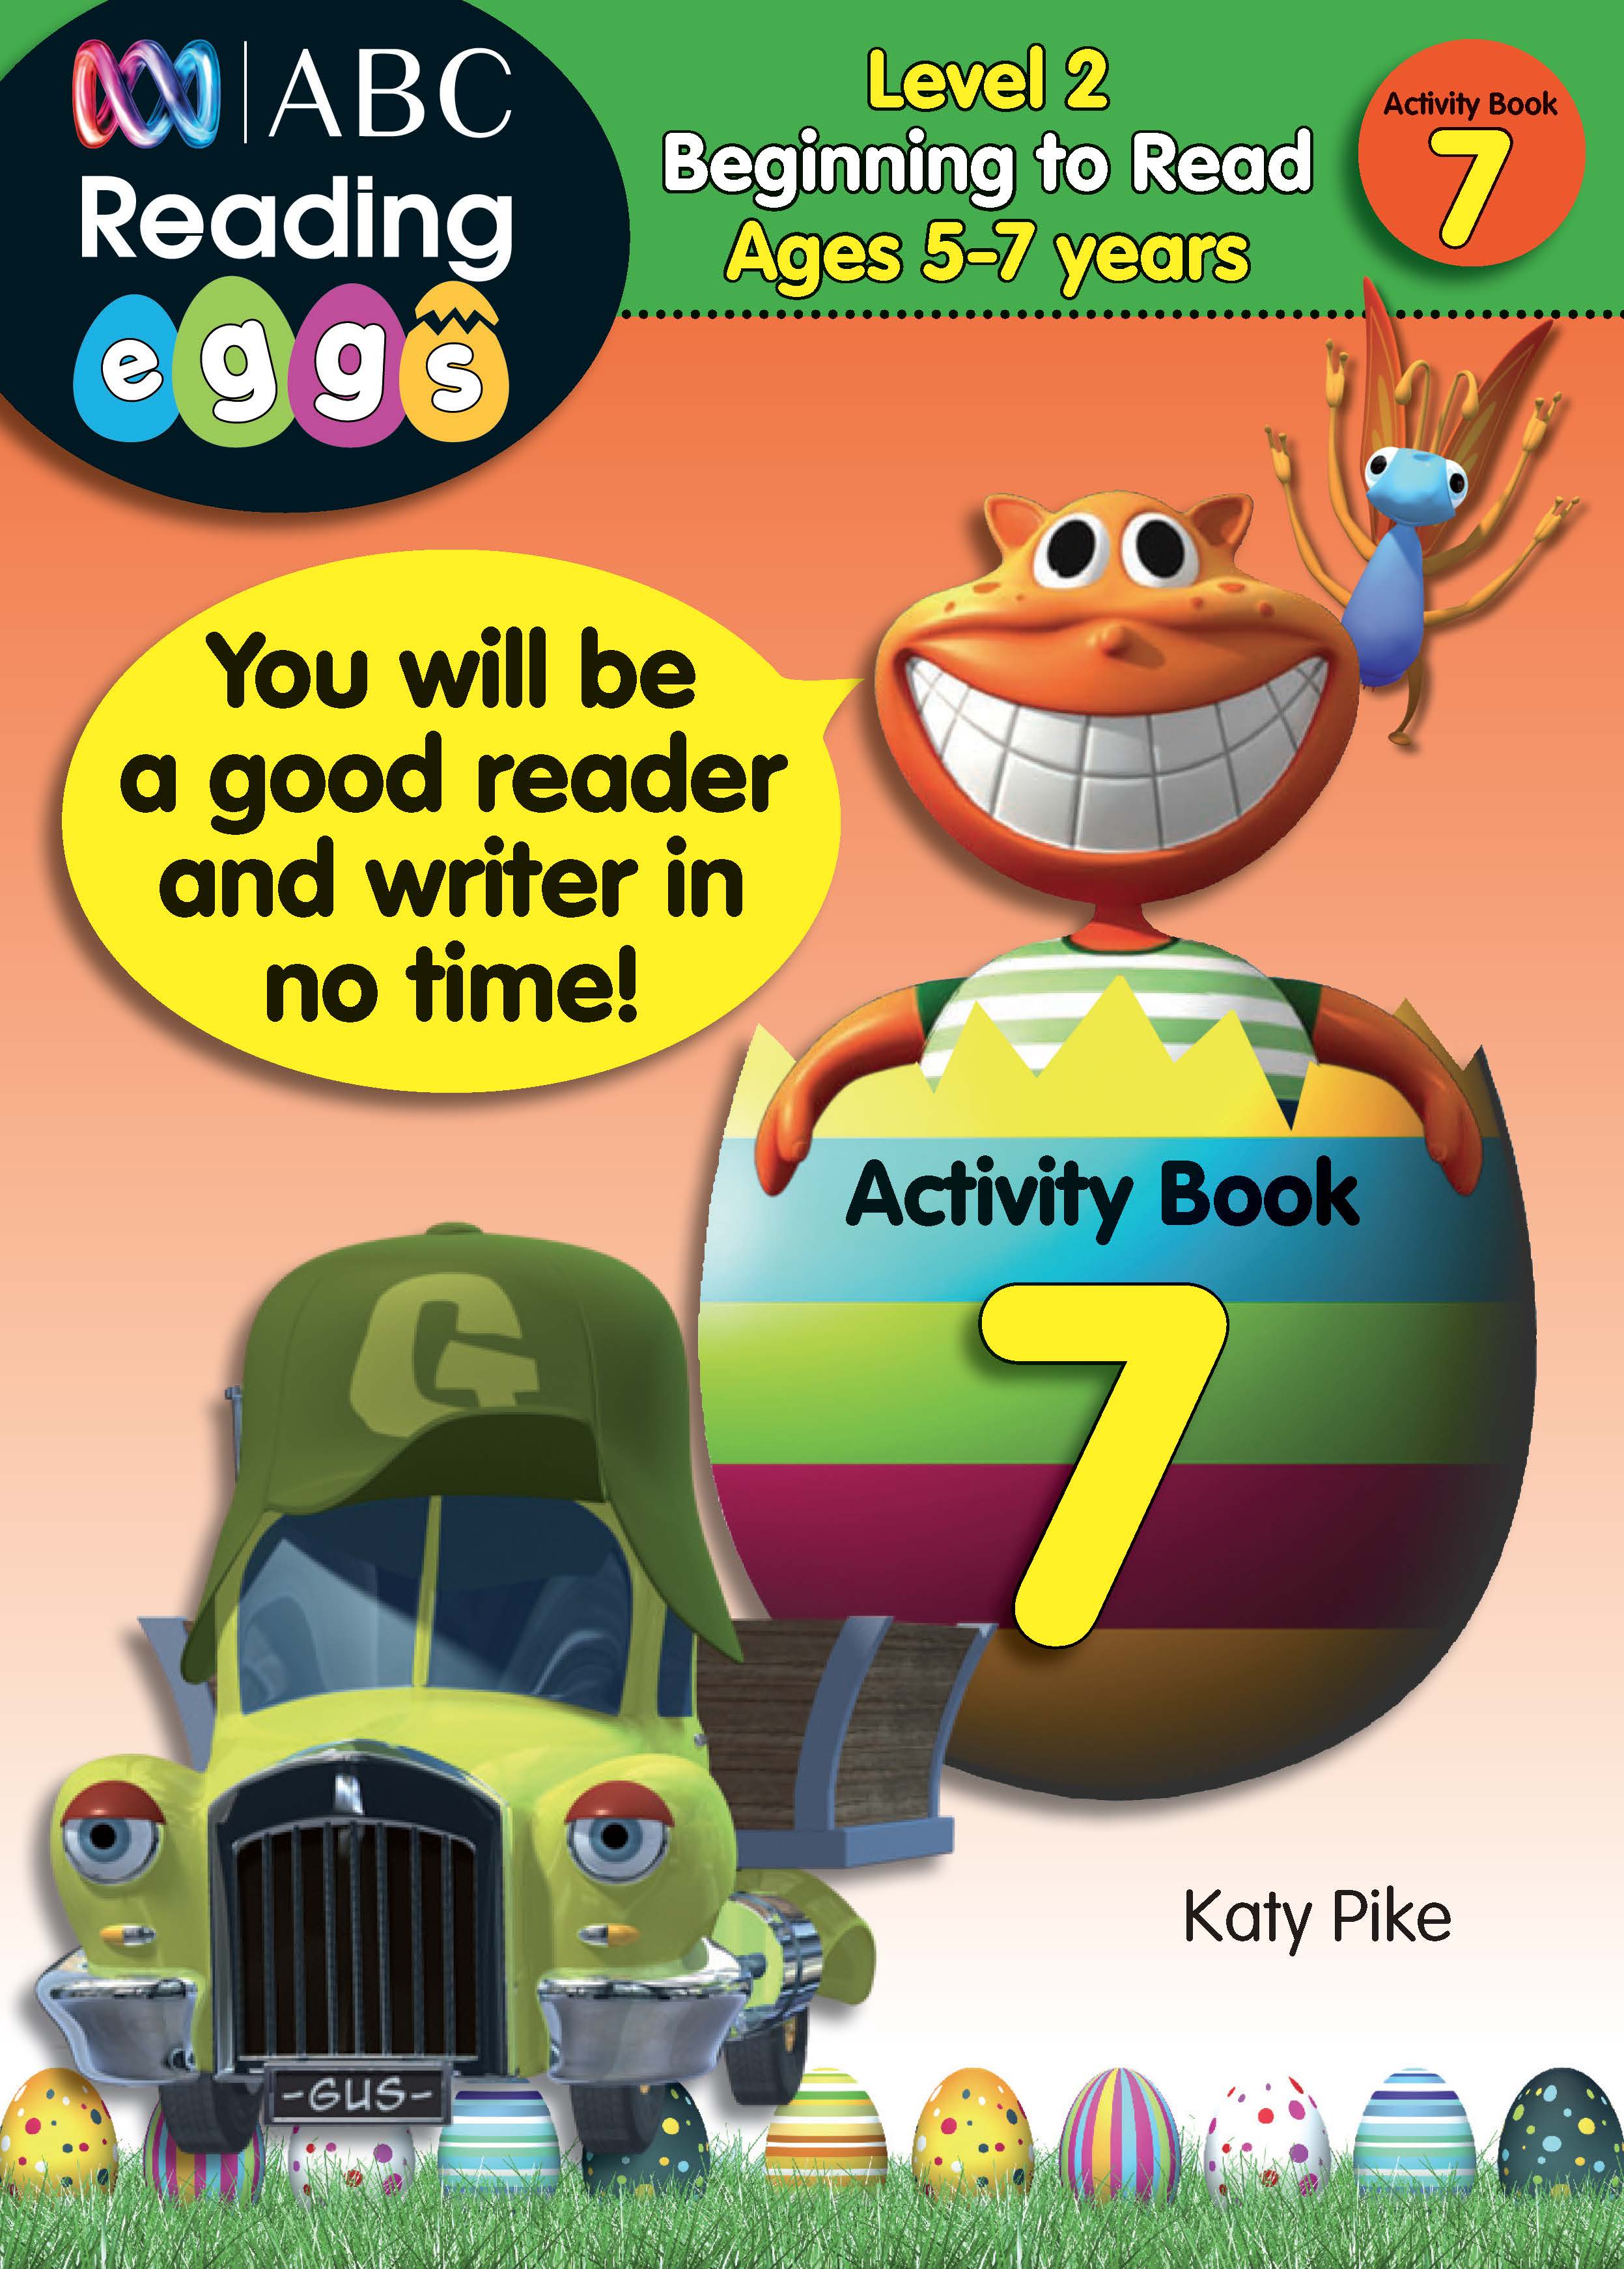 Picture of ABC Reading Eggs Level 2 Beginning to Read Activity Book 7 Ages 5-7